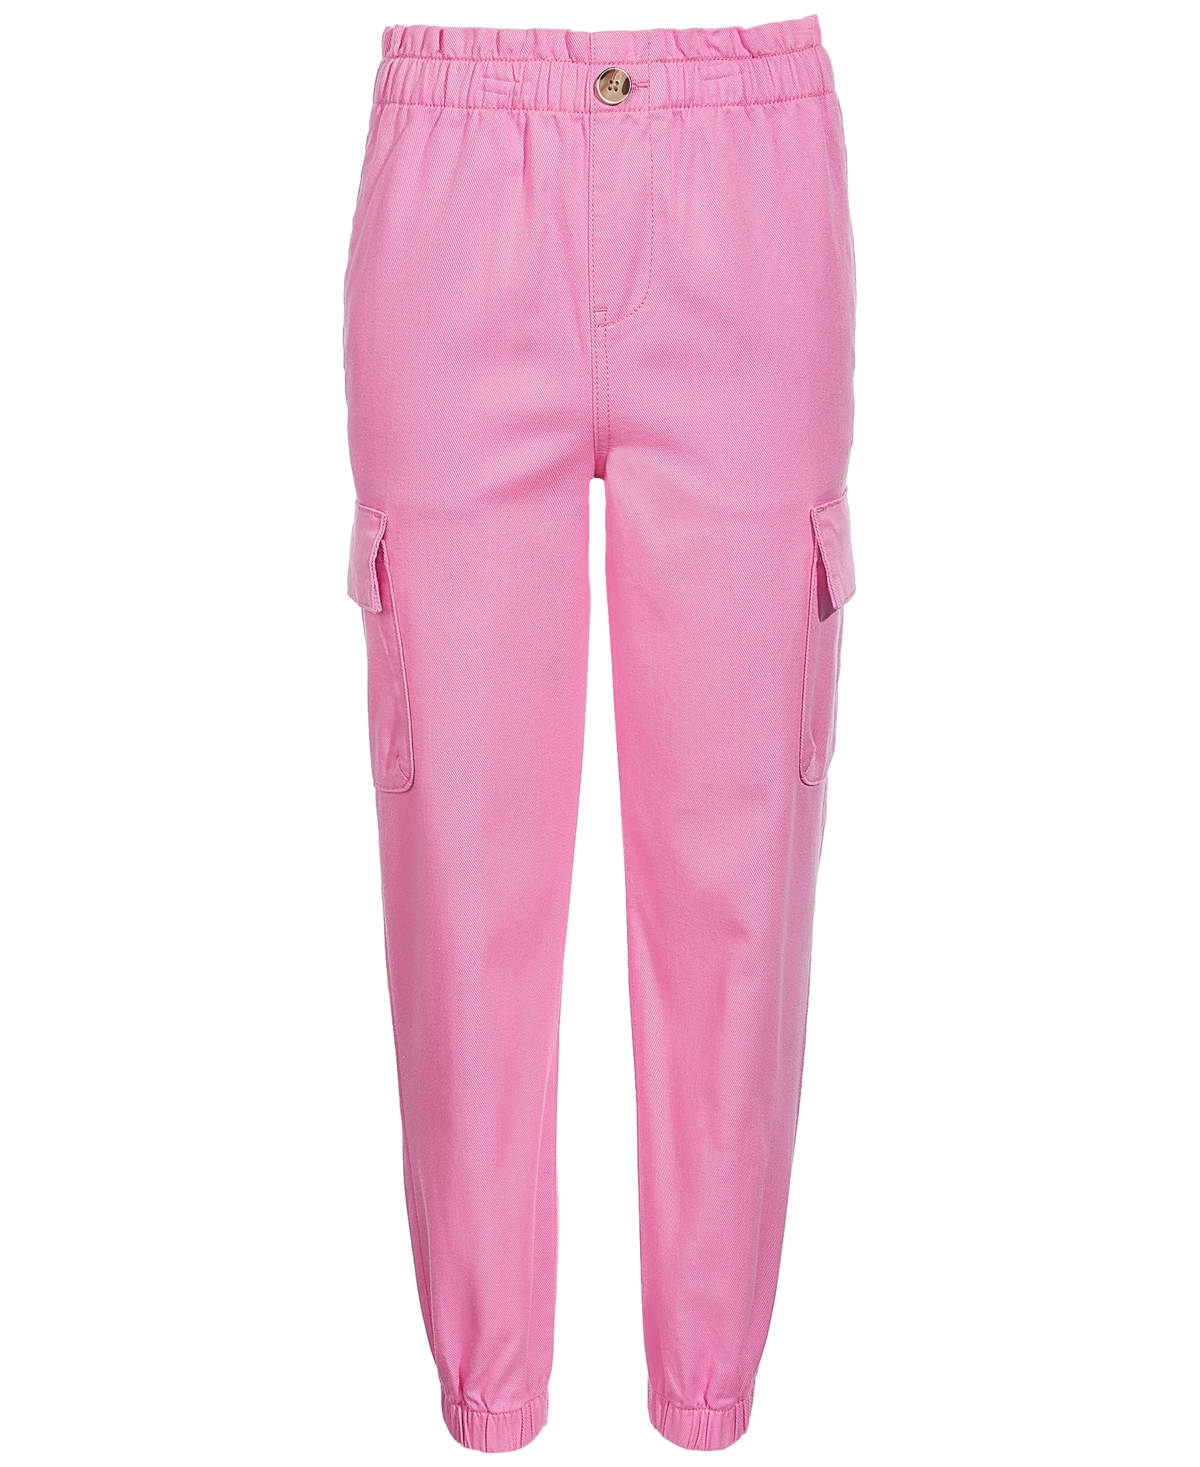 Epic Threads Big Girls Soft Twill Cargo Pants, Created For Macy's In Juicy Pink